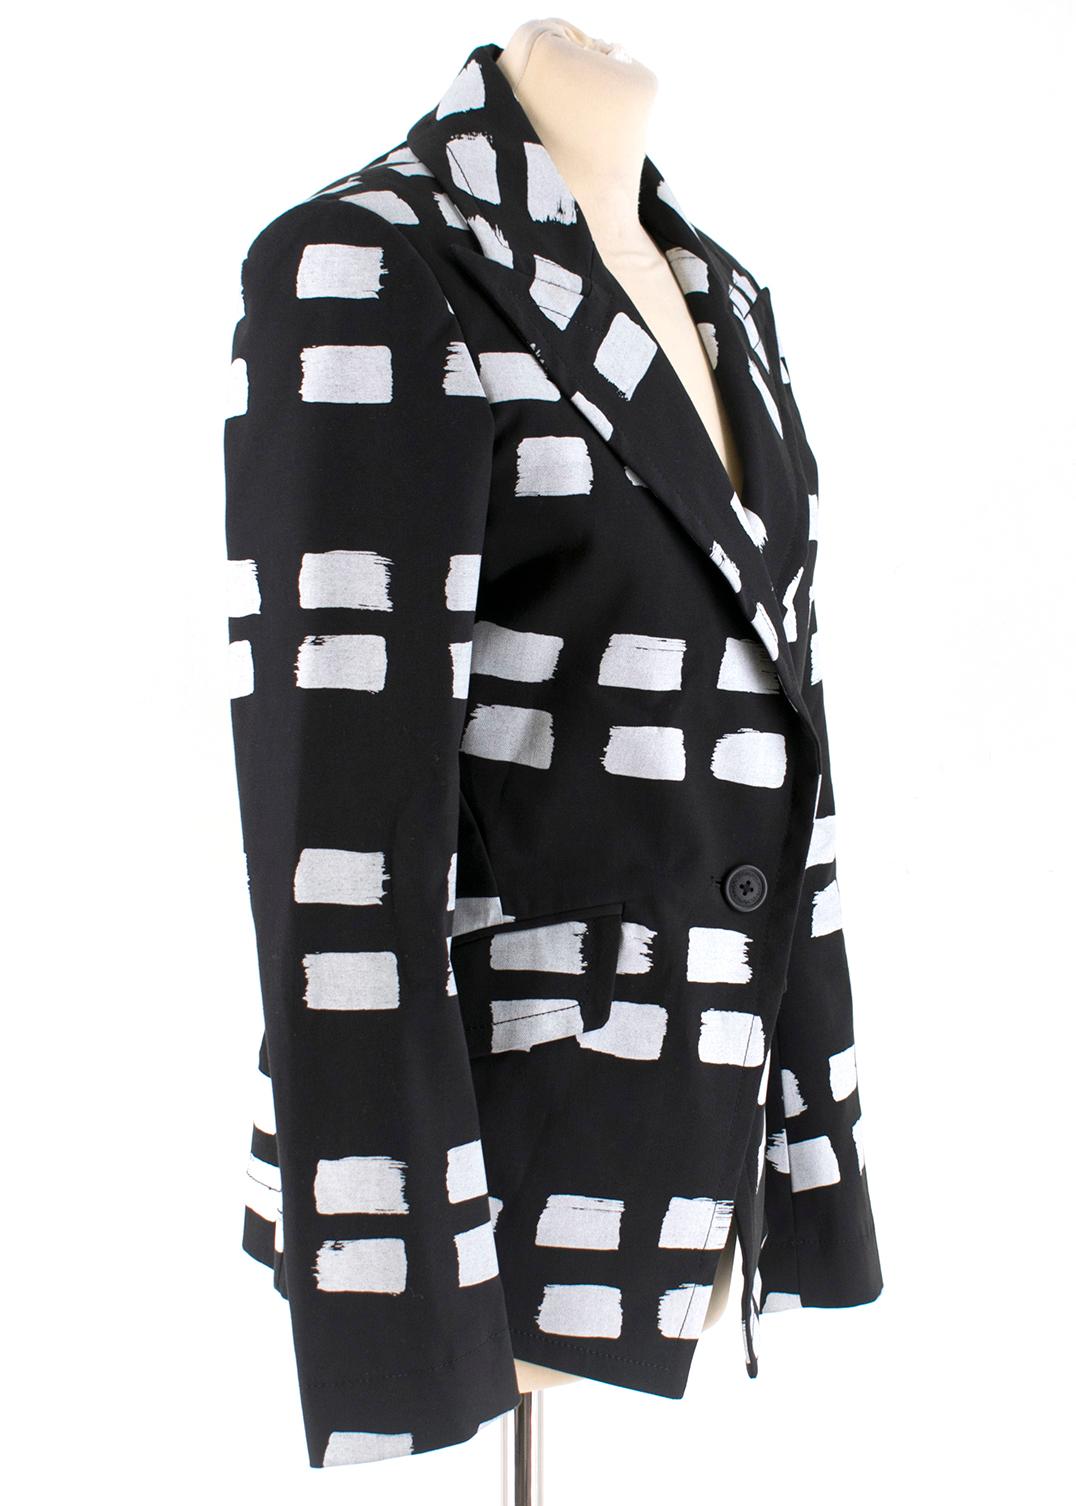 Vivienne Westwood Single-breasted blazer and Trousers set 

-White dot pointed pattern 
-Well structured jacket 
-One front button with padded shoulders 
-featuring notched lapels
-Two front flap pockets 
-Straight fitted trousers 
-Two side pockets